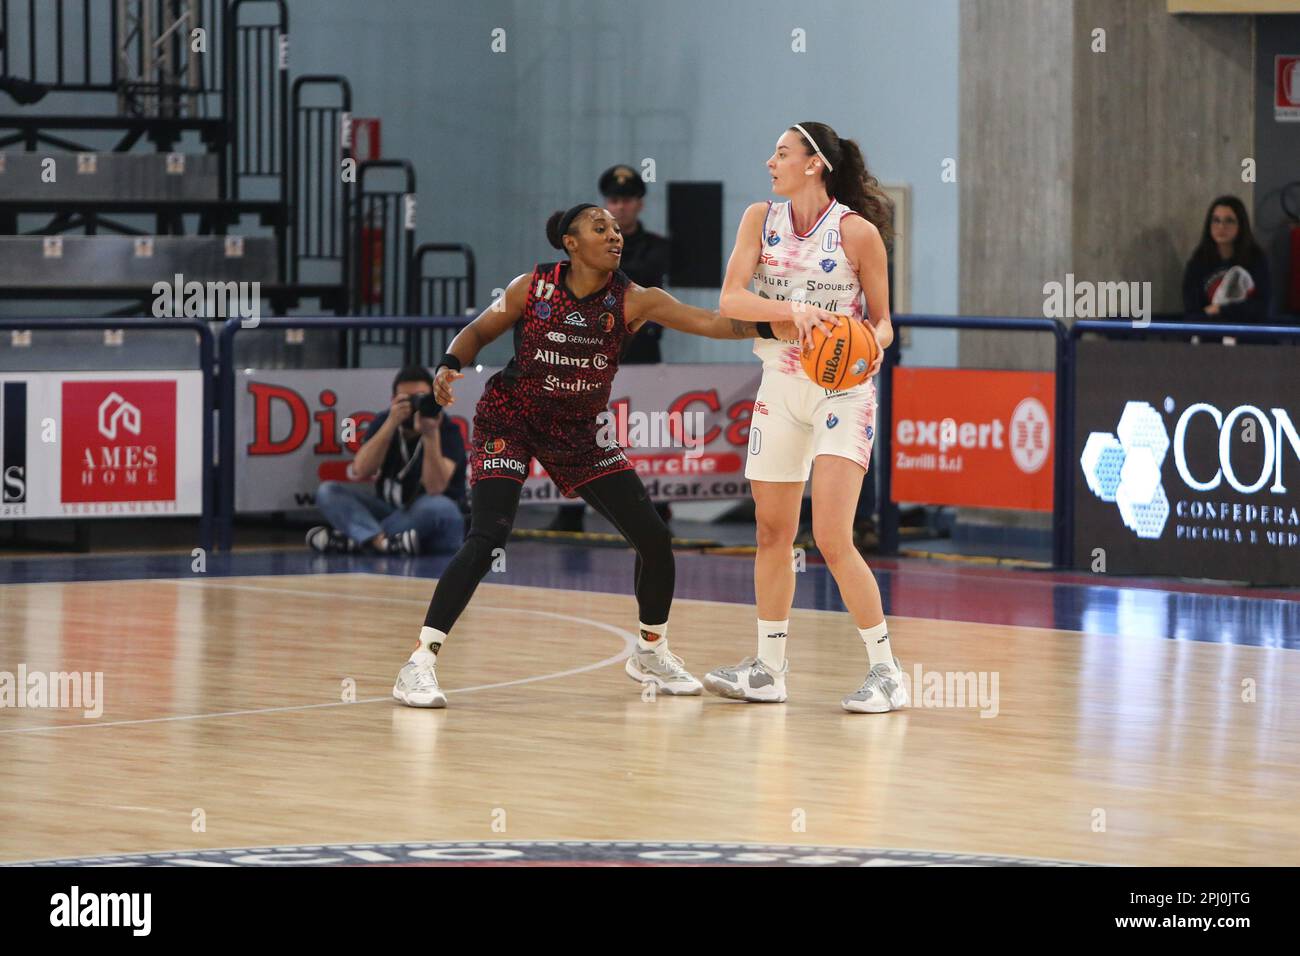 Campobasso, Italy. 30th Mar, 2023. Toffolo Sara (Sassari) and Sequoia Holmes (Sesto San Giovanni) in action during quarter finals - BdS Dinamo Sassari vs Allianz Geas Sesto San Giovanni, Basketball Italian Women Cup in Campobasso, Italy, March 30 2023 Credit: Independent Photo Agency/Alamy Live News Stock Photo